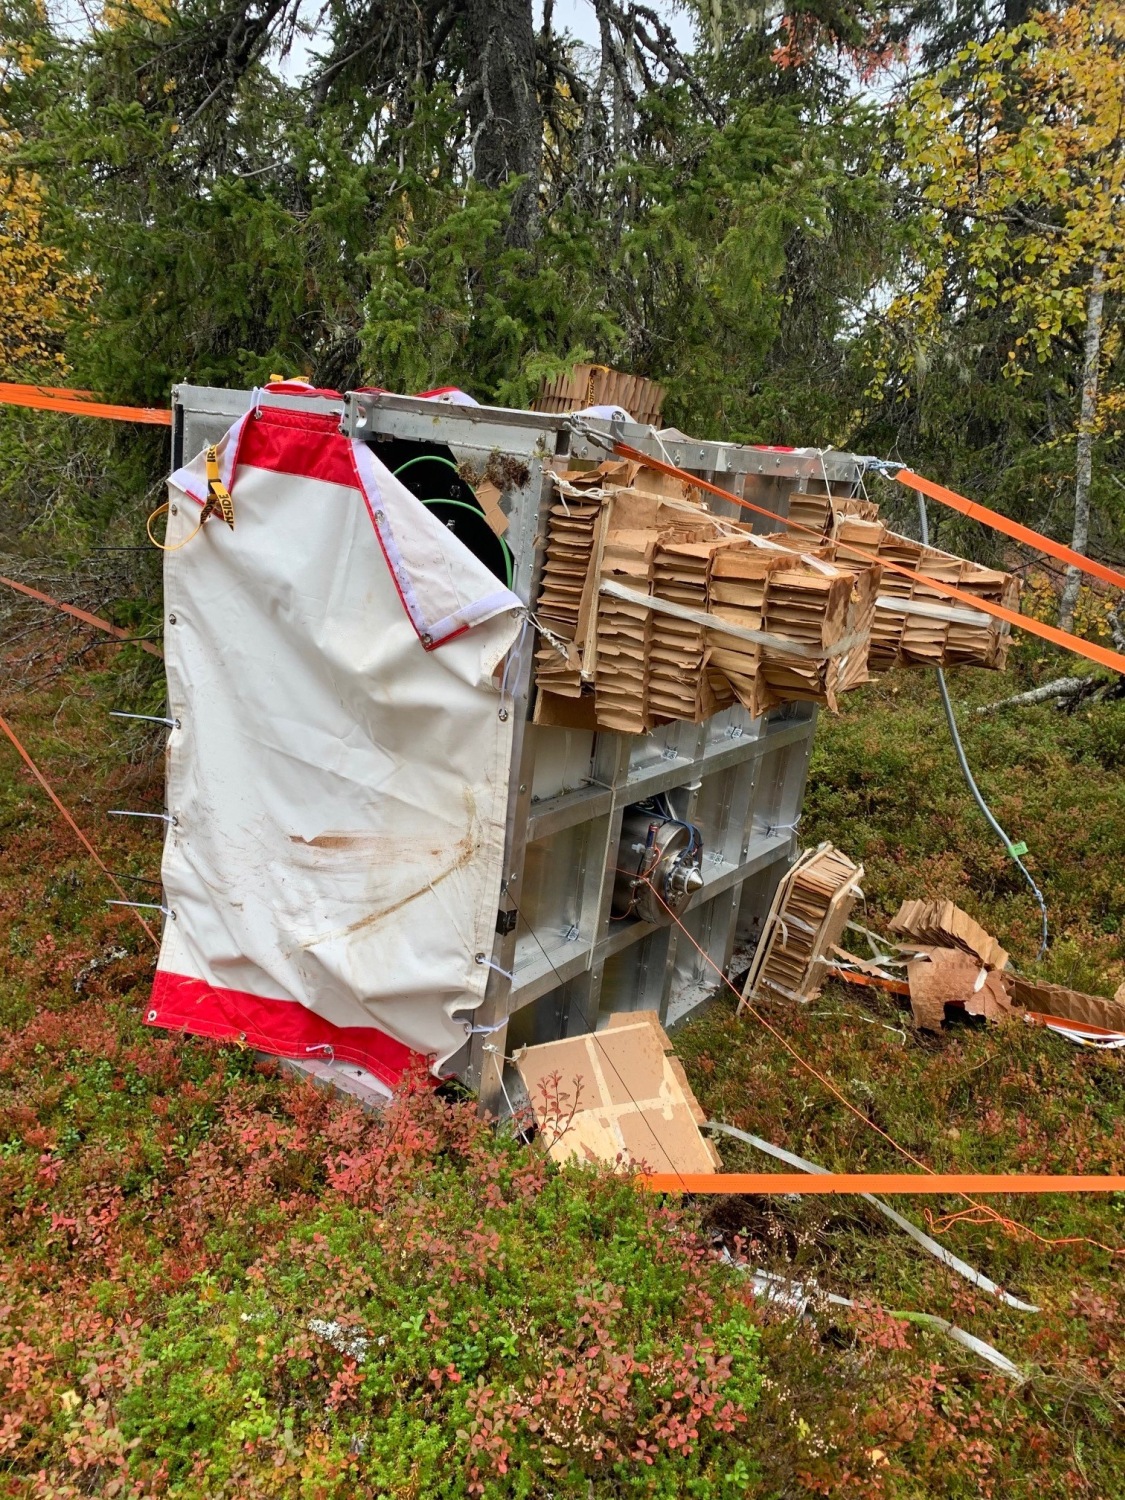 The gondola after landing in the woods in Finland